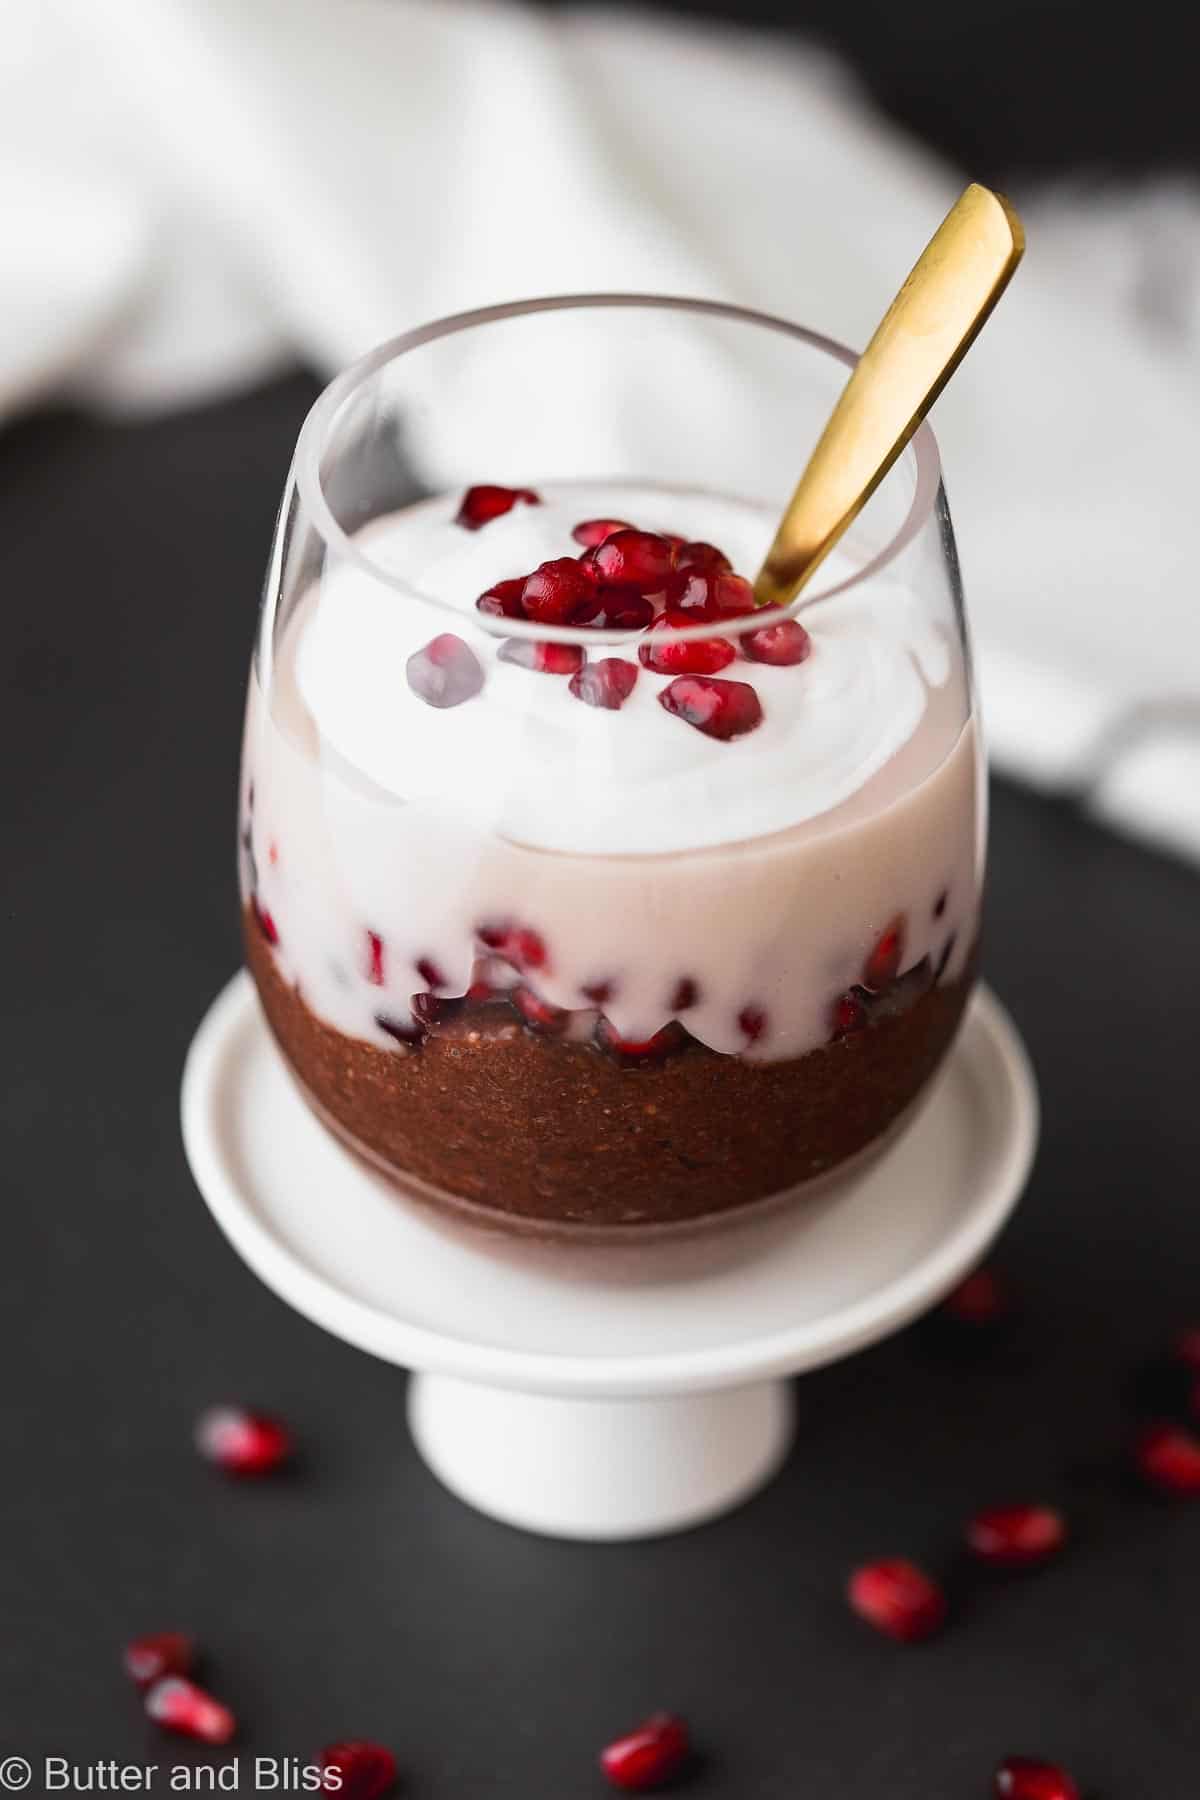 Chocolate chia pudding in a glass on a small plate